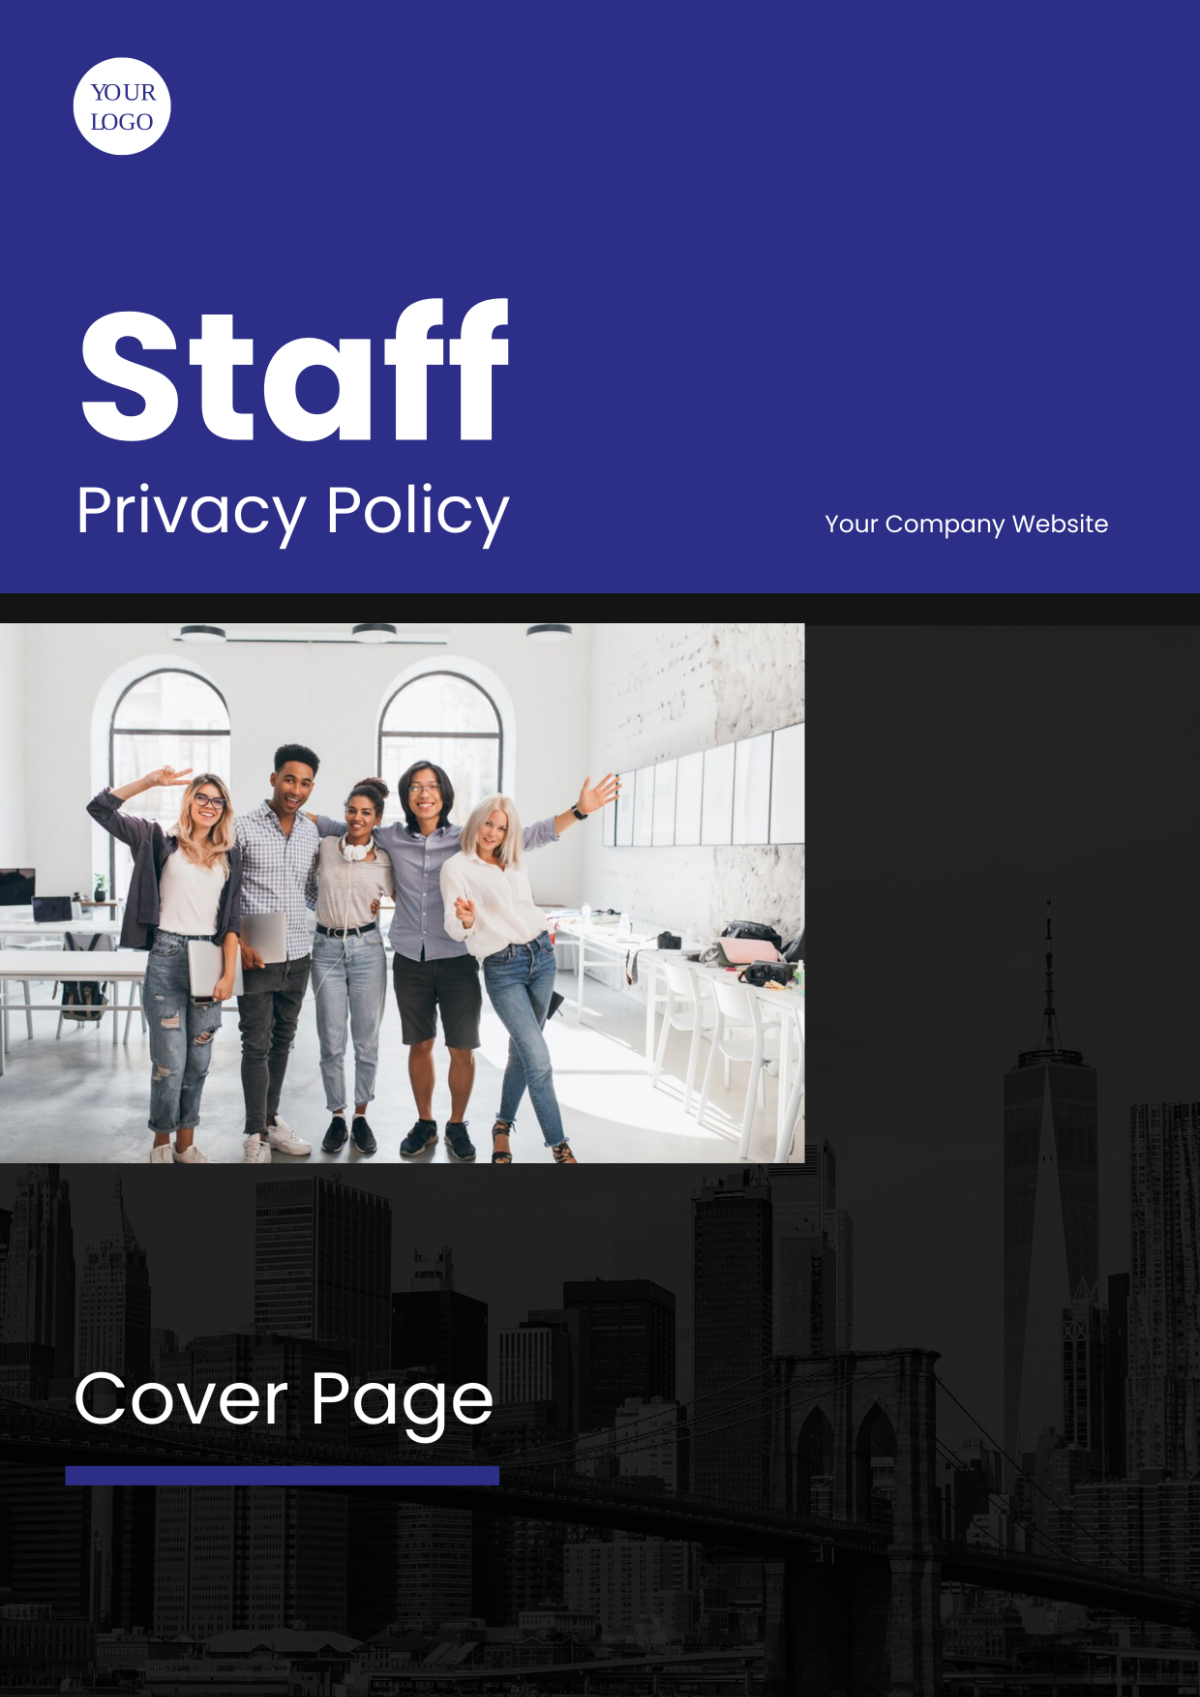 Staff Privacy Policy Cover Page